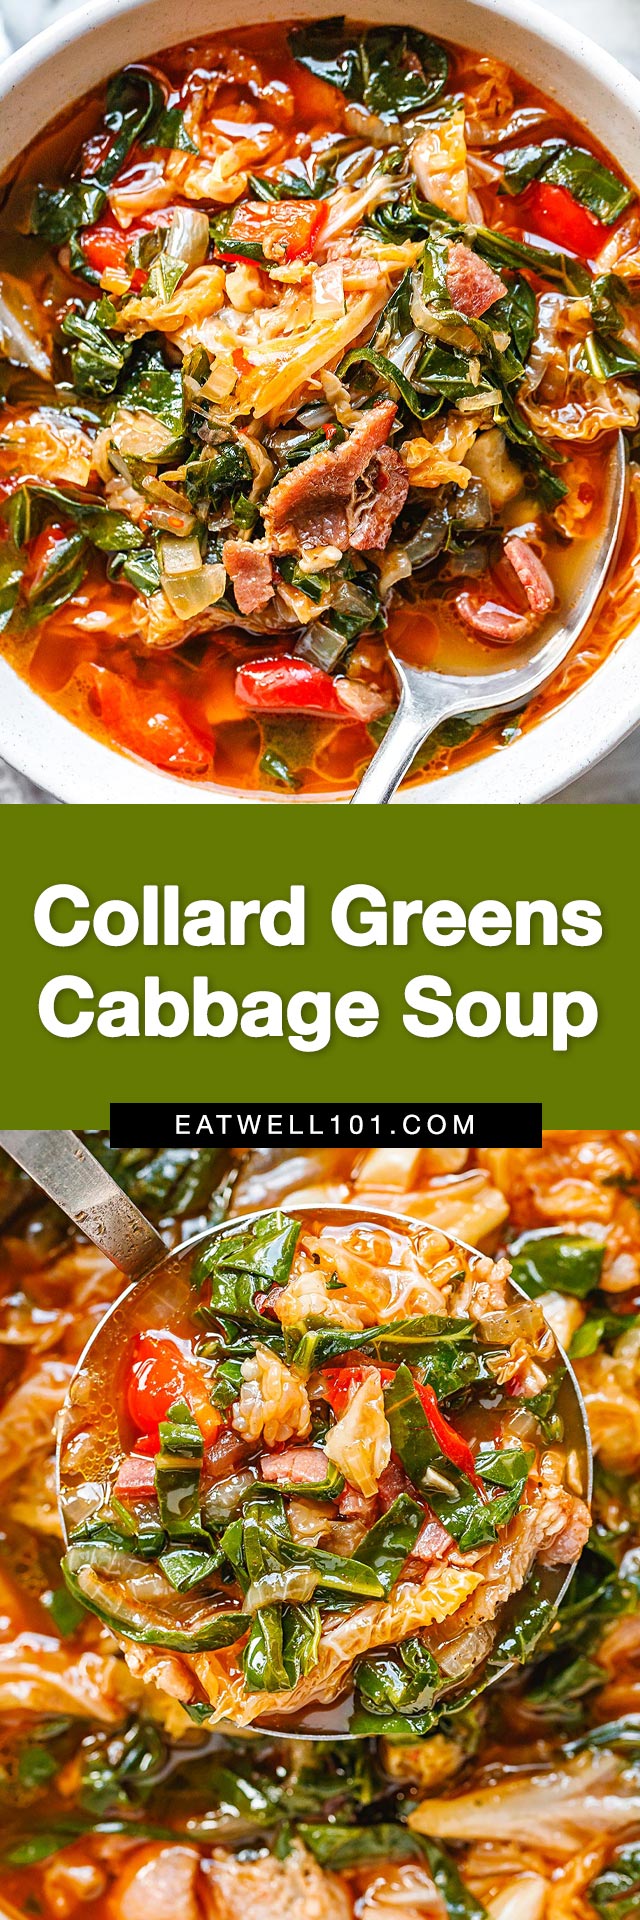 Collard greens and cabbage soup - #cabbage #collardgreens #soup #recipe #eatwell101 - Try our cabbage and collard greens soup for a dinner that's super satisfying, high in fiber, low-calorie, gluten-free, loaded with veggies!